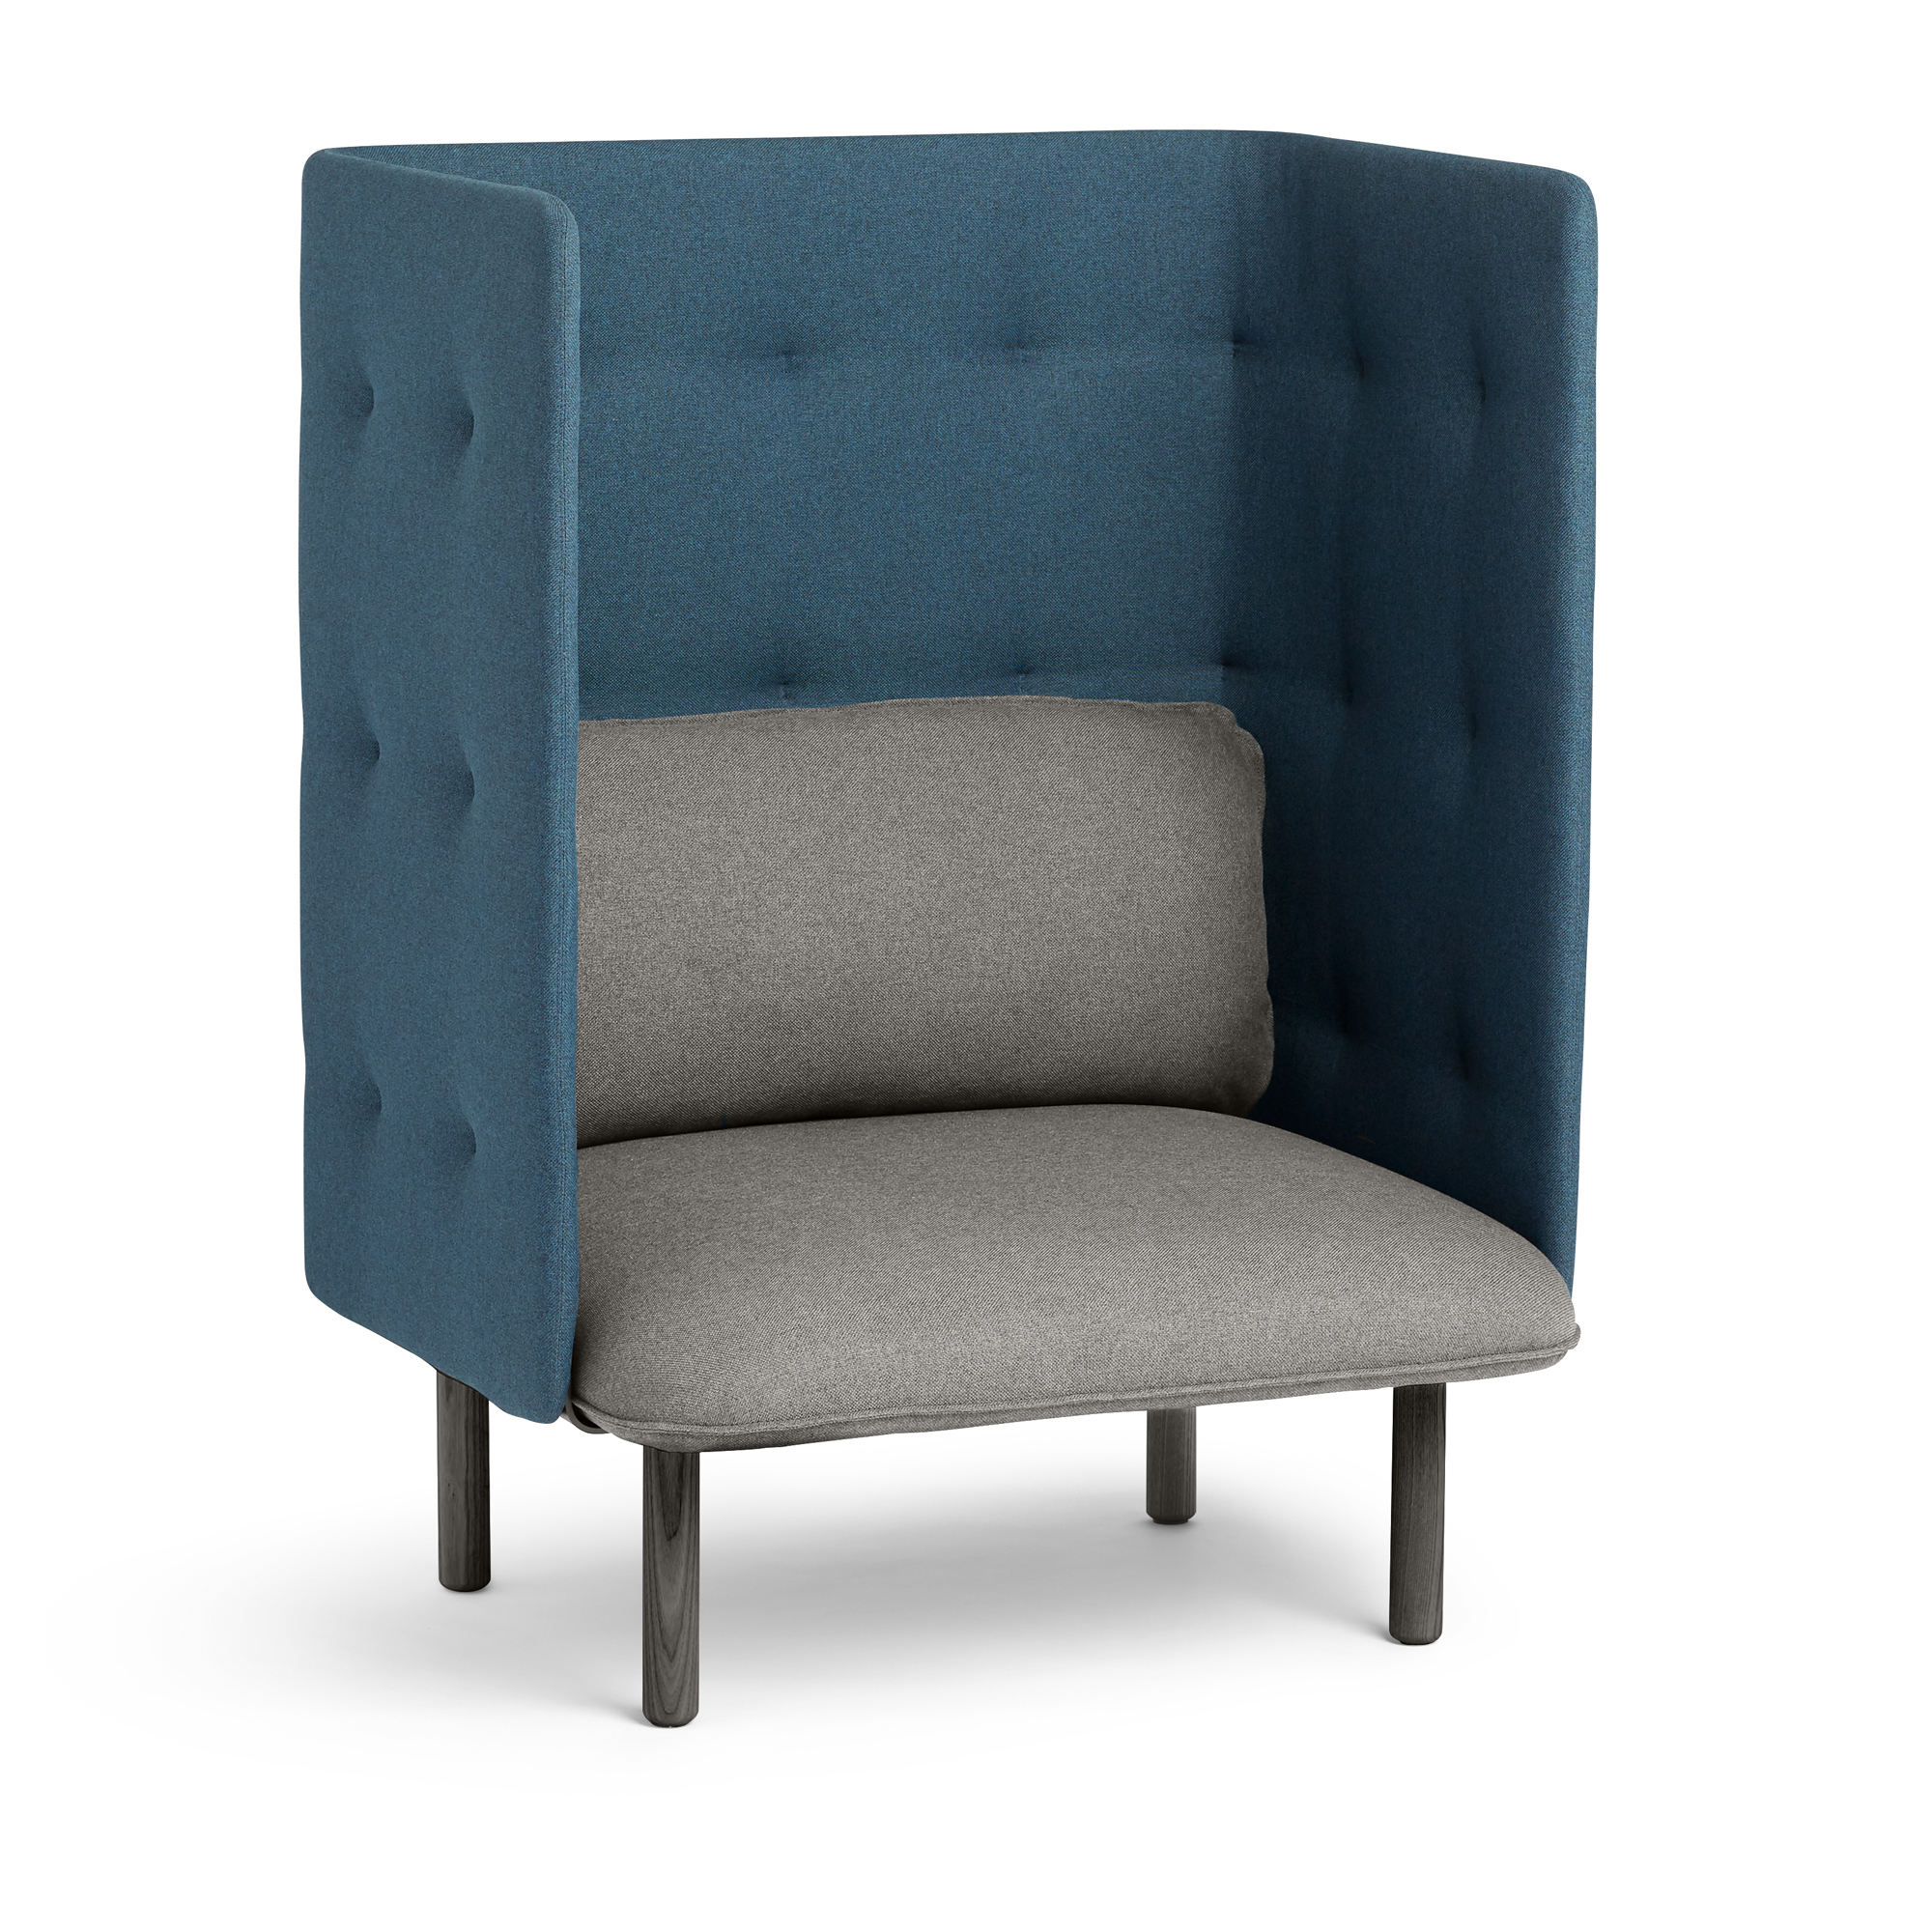 gray  dark blue qt lounge chair  modern lounge  privacy seating  poppin